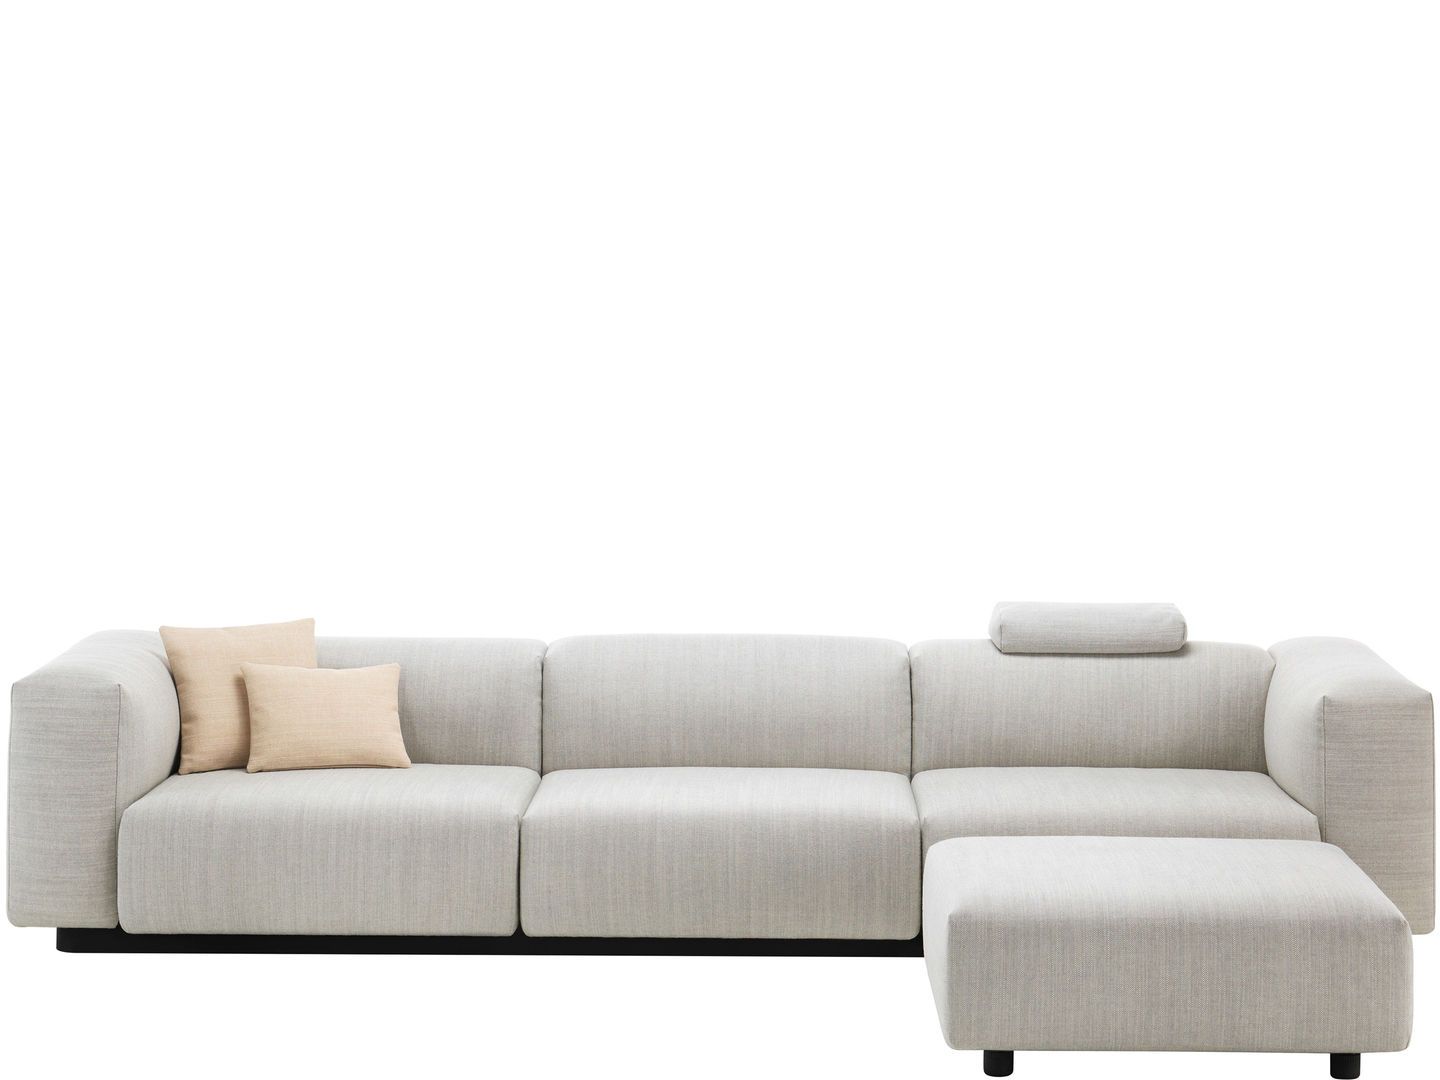 Vitra Soft Modular Sofa Three-seater and Ottoman from One52 Furniture